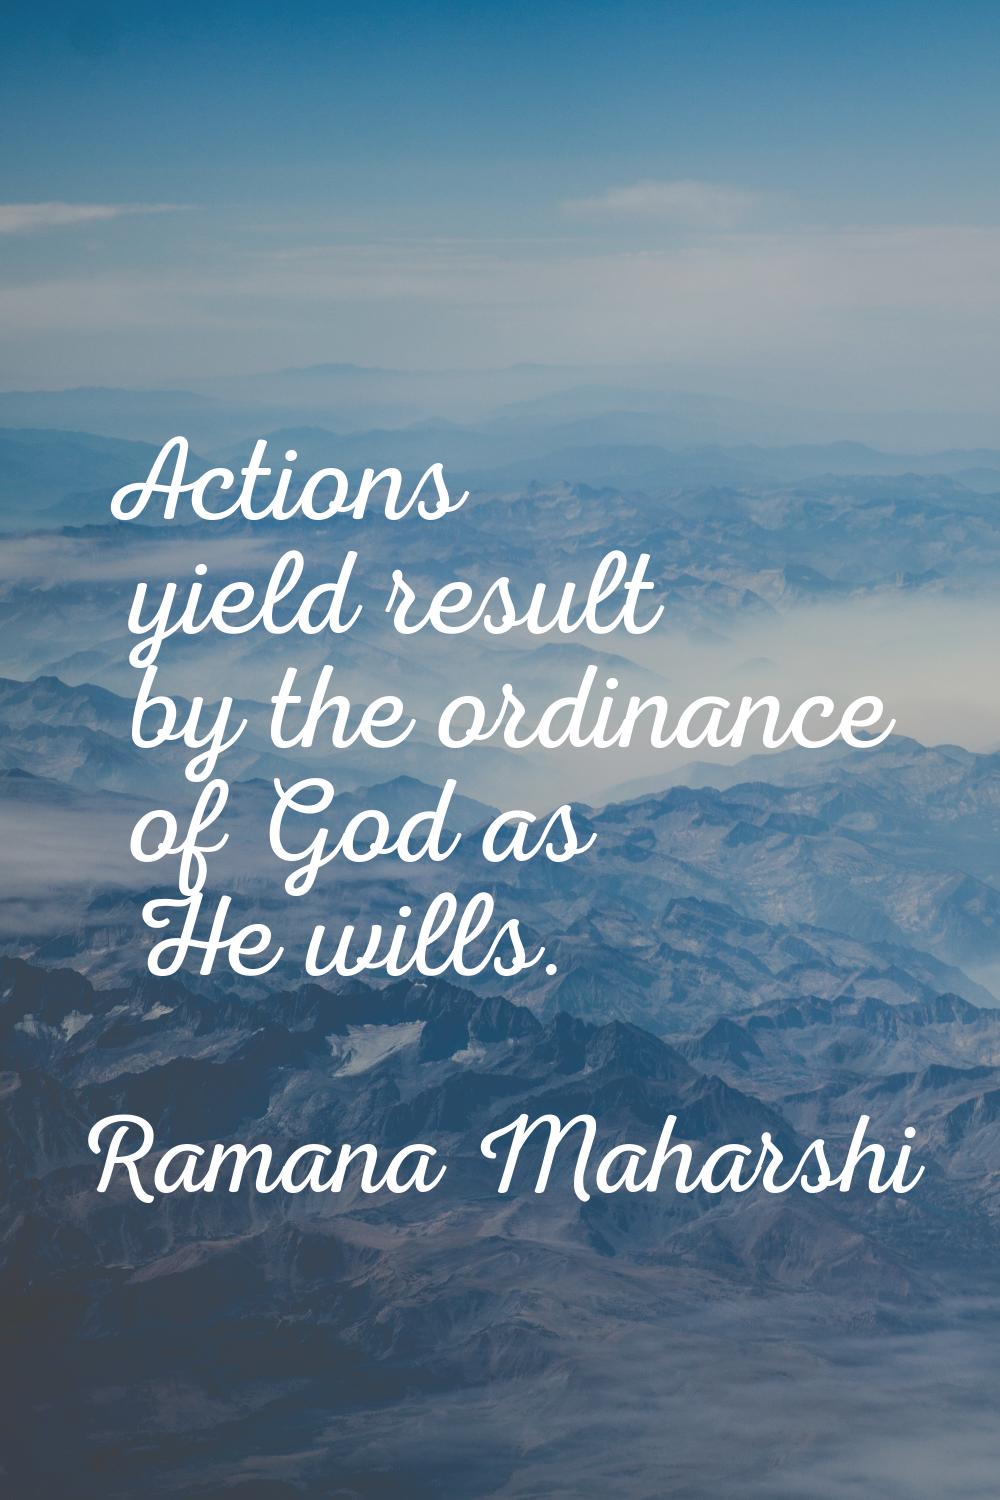 Actions yield result by the ordinance of God as He wills.